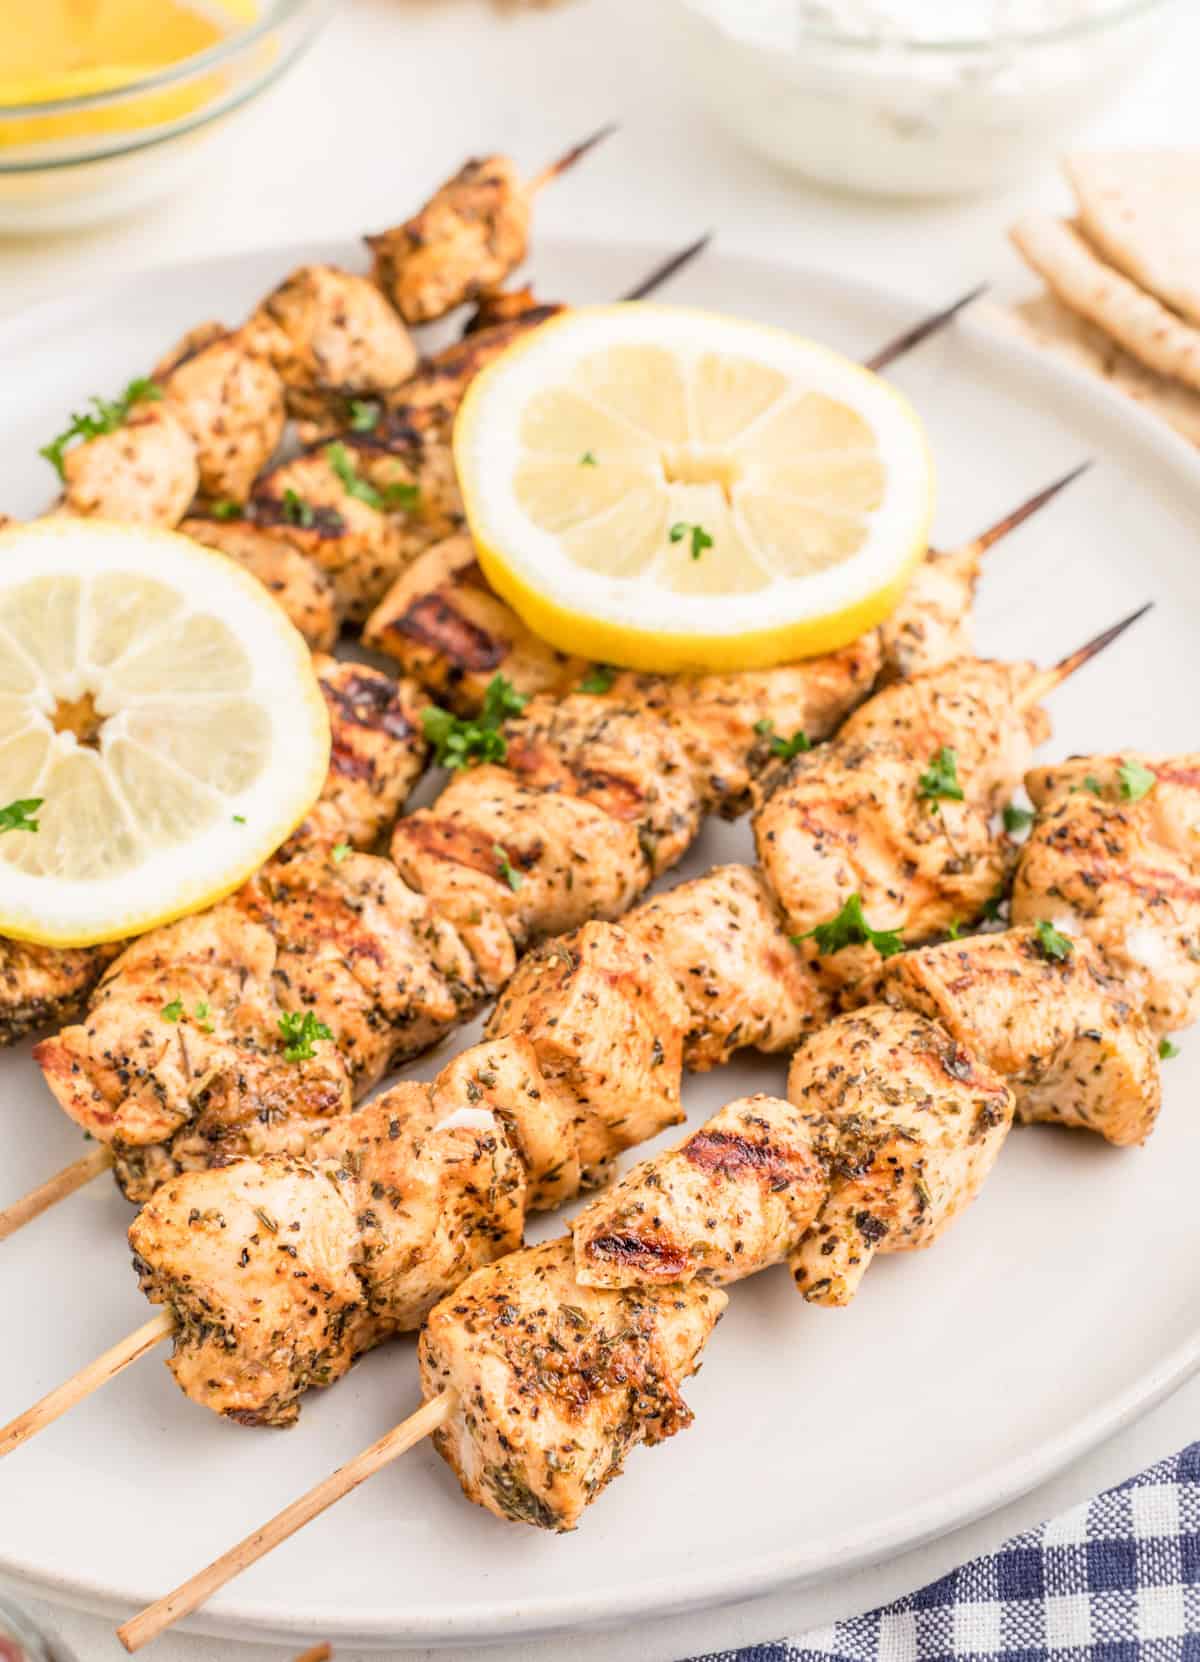 Finished Chicken Souvlaki on white plate garnished with herbs and lemon slices.